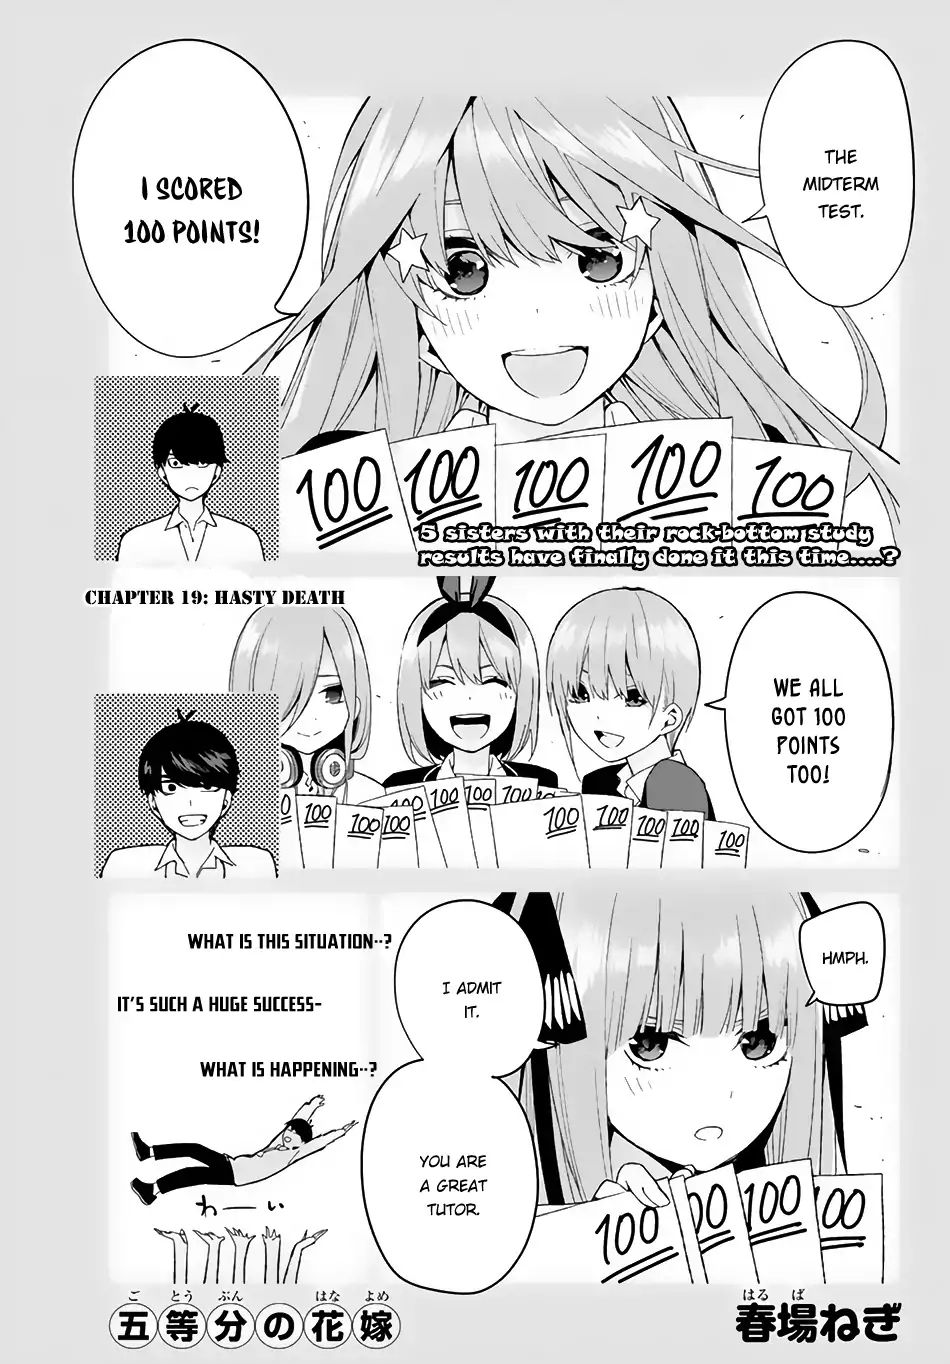 Go-Toubun No Hanayome Vol.3 Chapter 19: Hasty Death - Picture 2